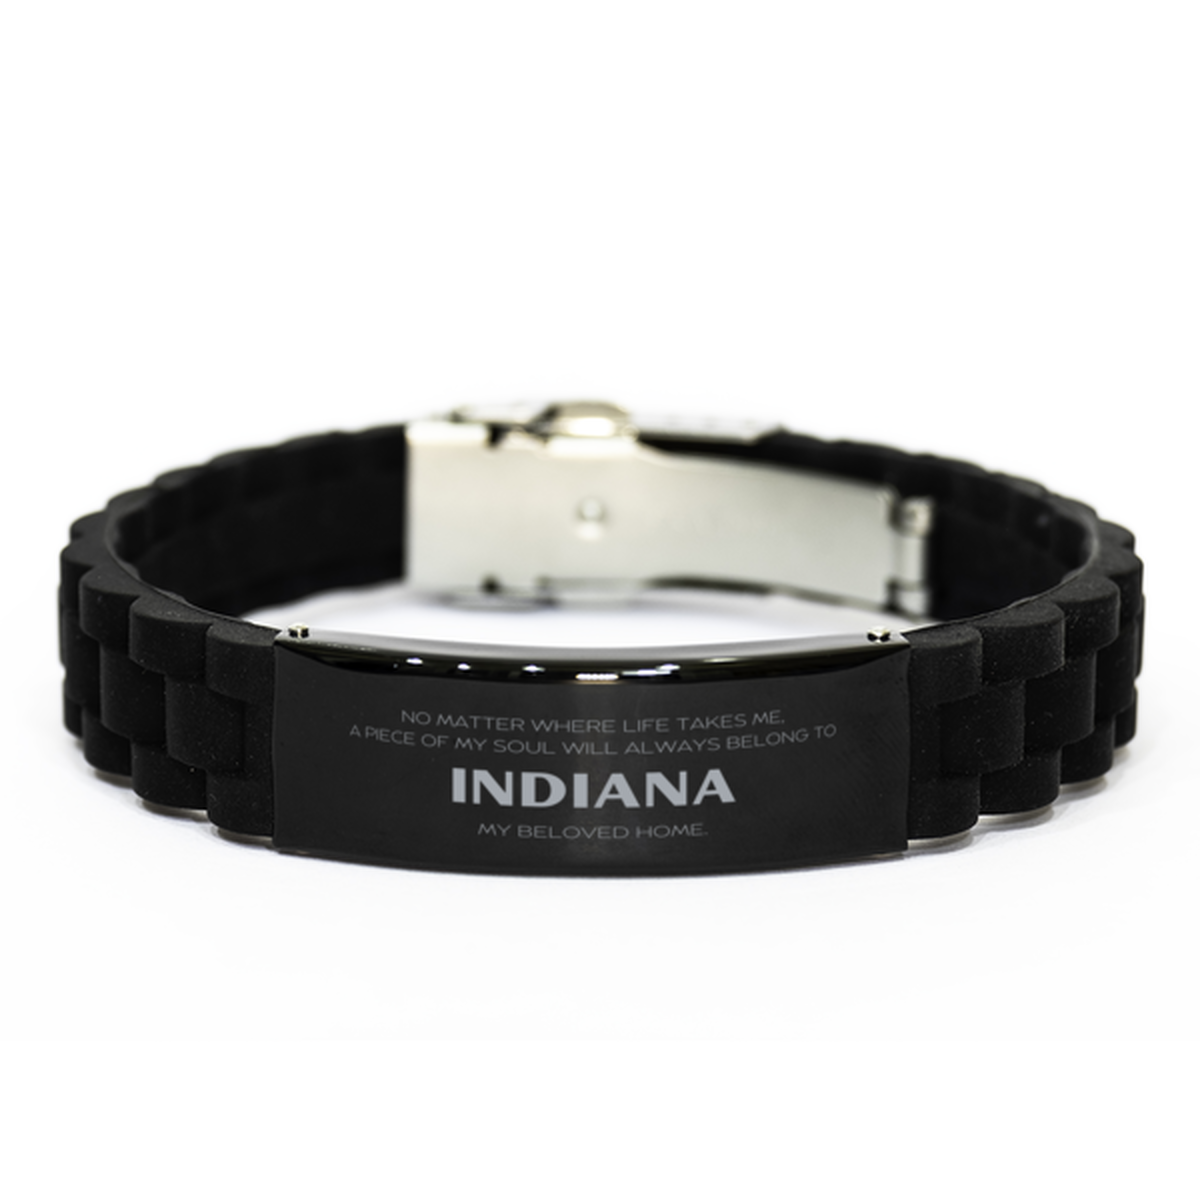 Love Indiana State Gifts, My soul will always belong to Indiana, Proud Black Glidelock Clasp Bracelet, Birthday Unique Gifts For Indiana Men, Women, Friends